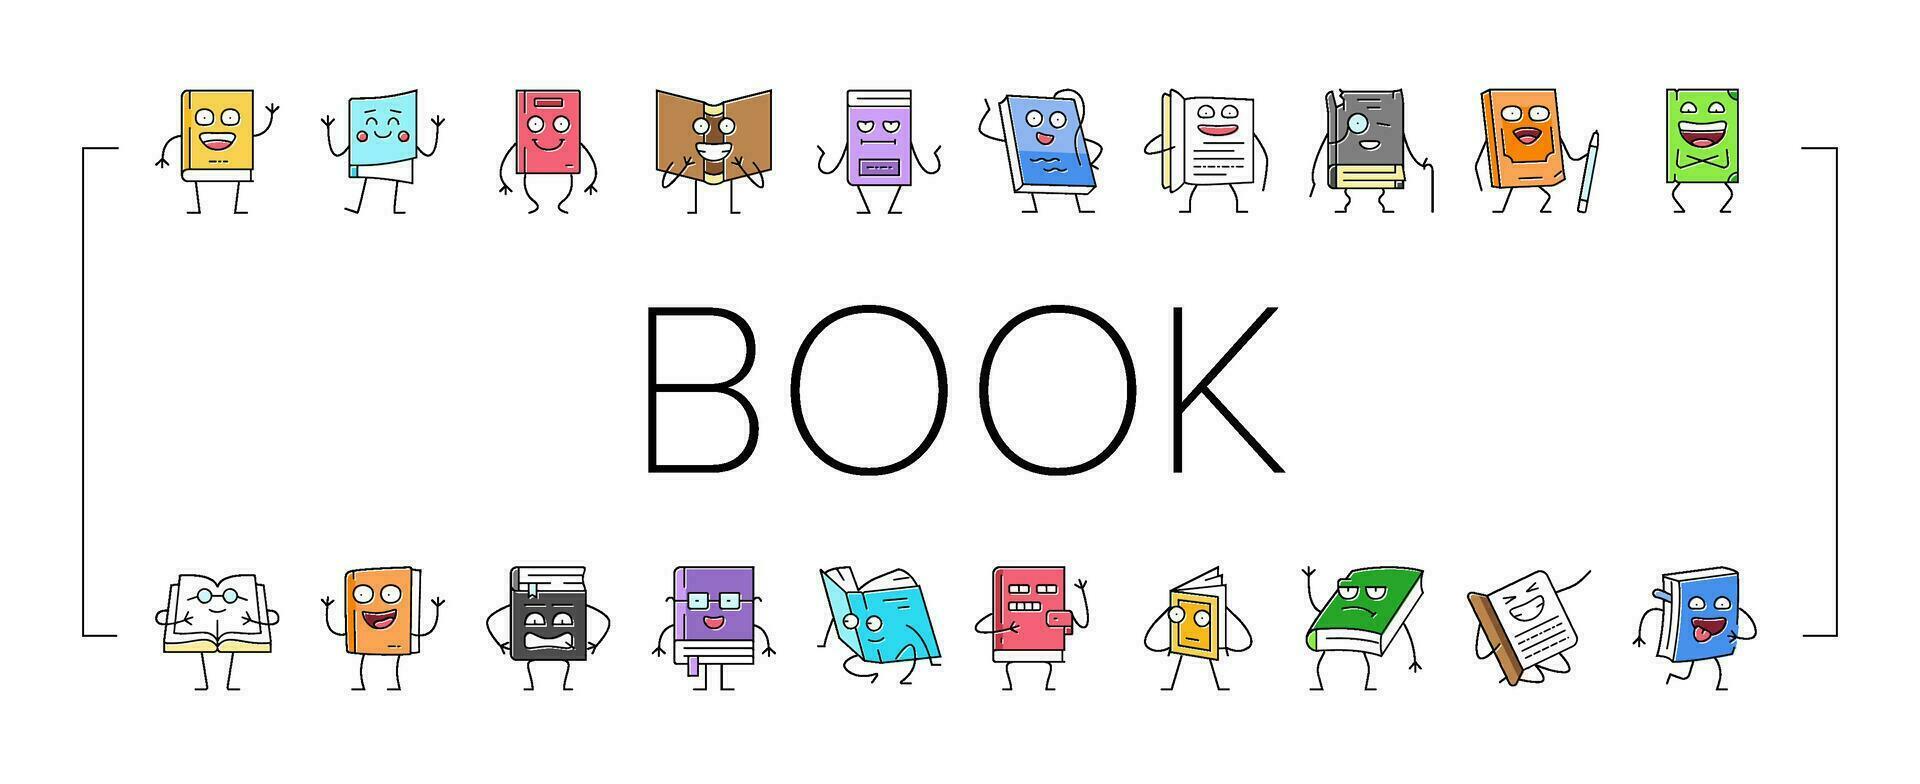 book character education library icons set vector